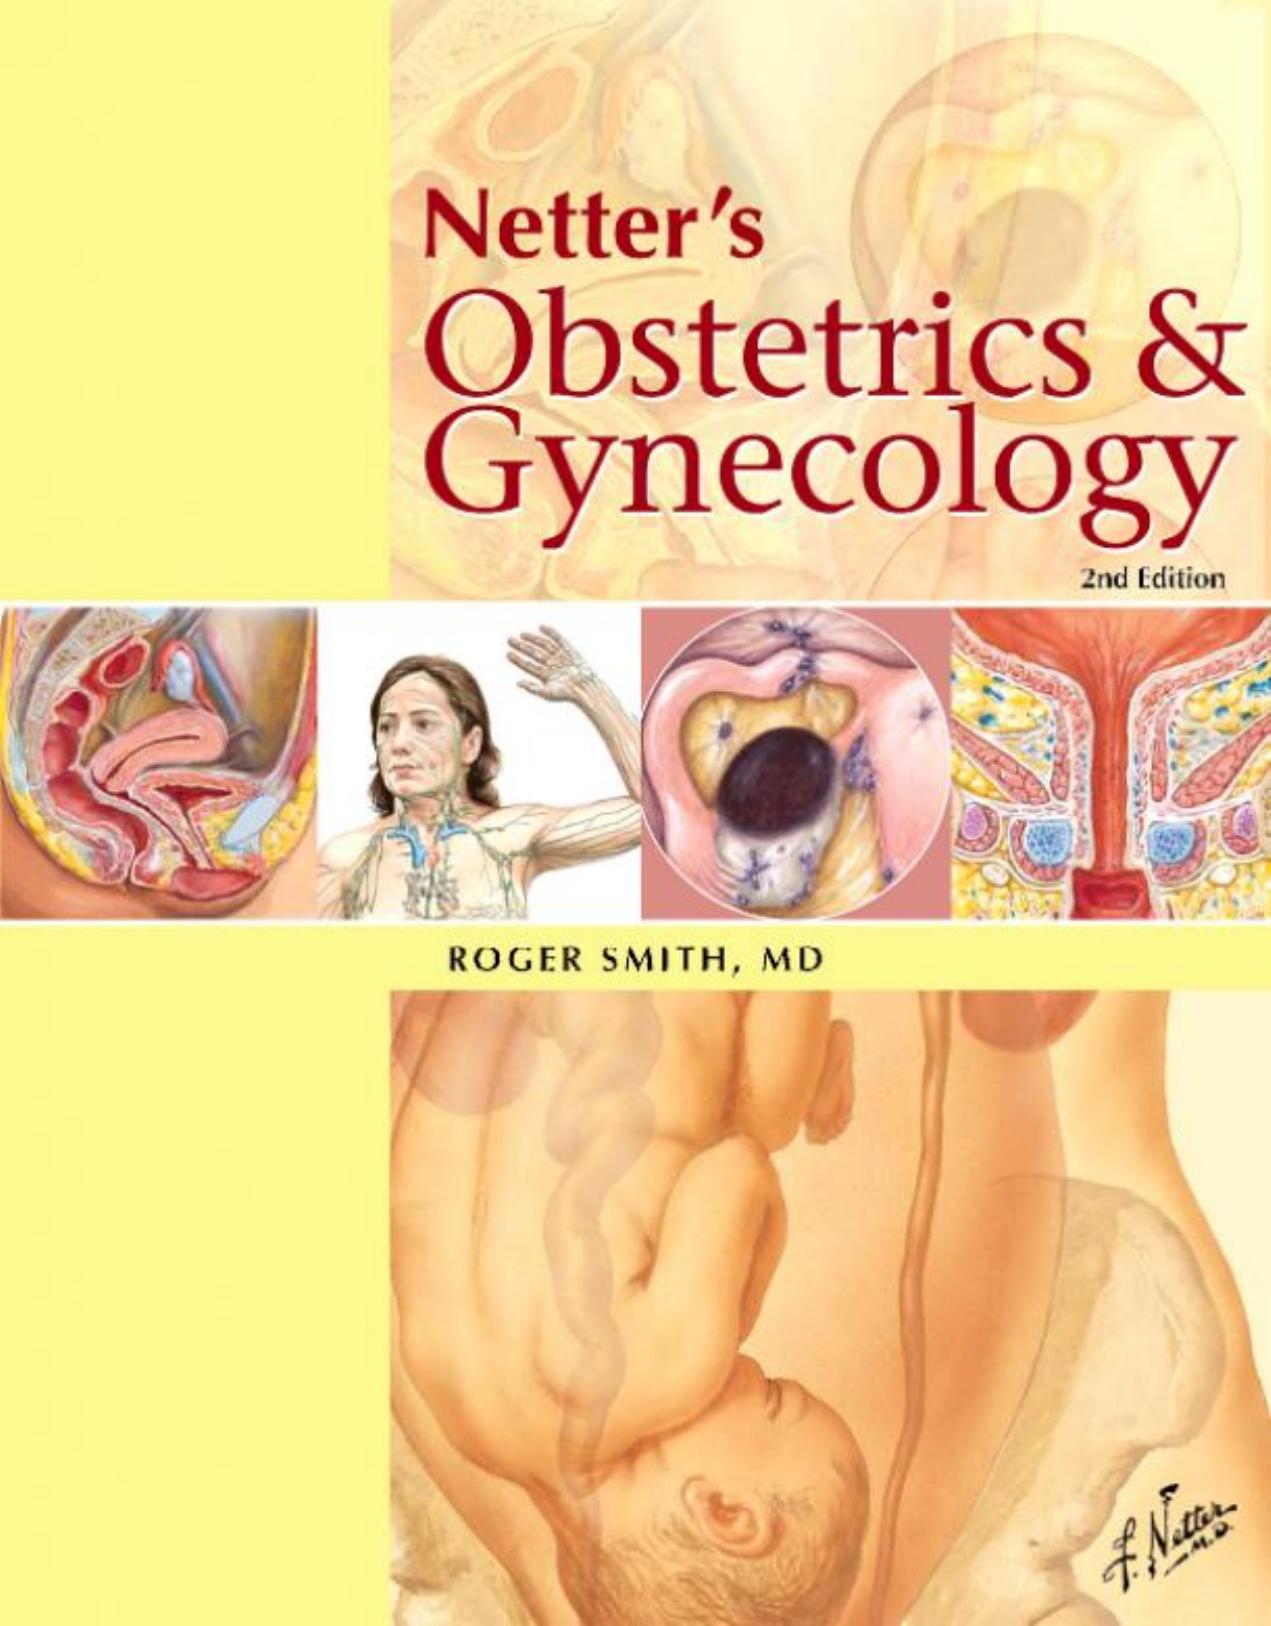 Netter's Obstetrics and Gynecology (Netter Clinical Science), Second Edition